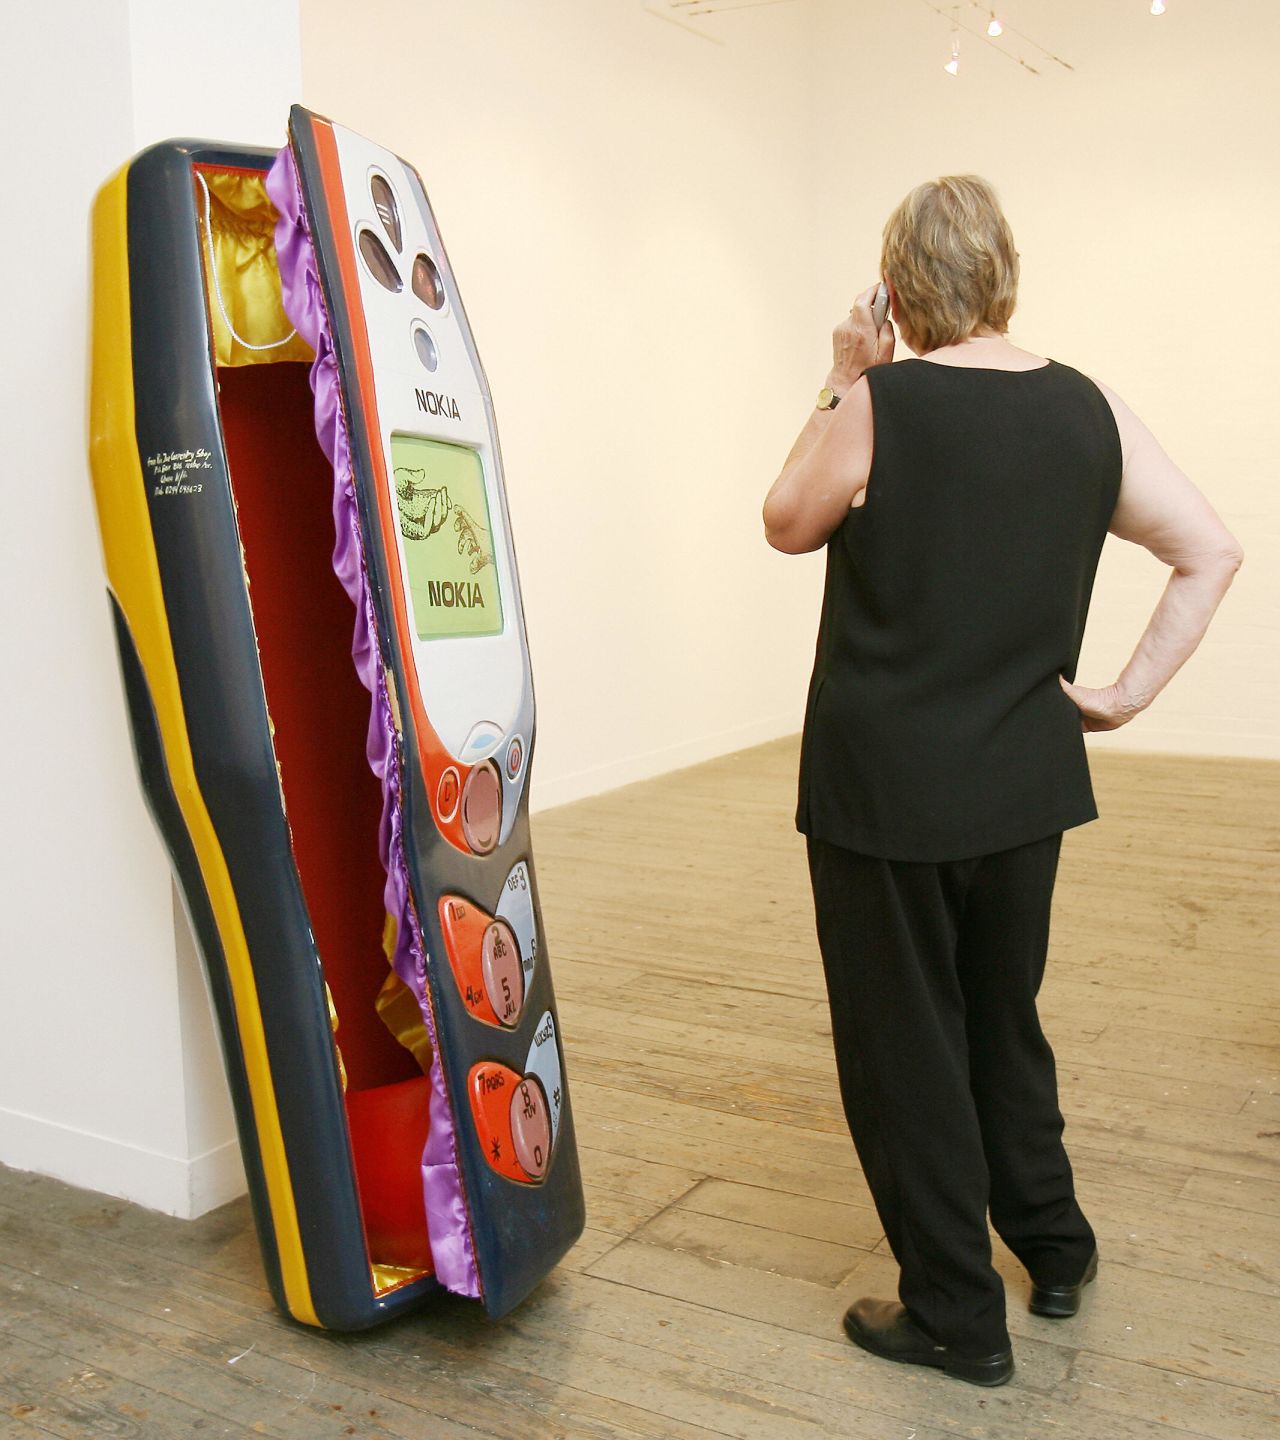 Another of Paa Joe's creations, a coffin carved in the shape of a mobile phone also at the Melbourne Festival in 2006. 